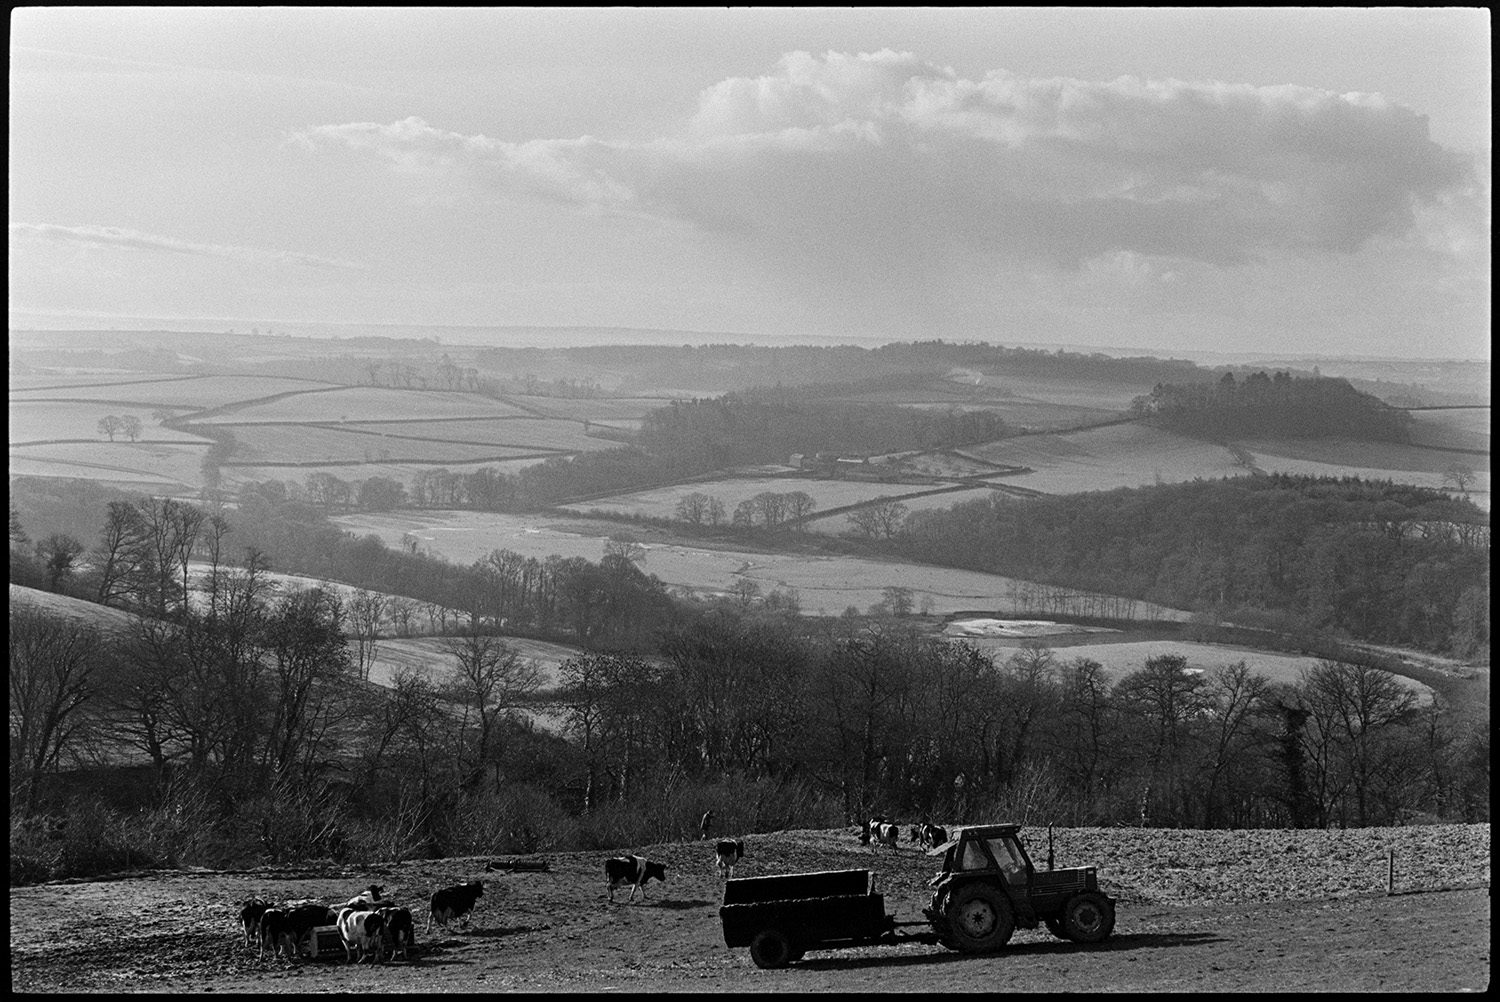 Cows on misty early morning, sunrise over distant moor. 
[A tractor and muck spreader in a field with cows eating from a feeder at Harepath, Beaford. A misty landscape with fields, trees, the River Torridge and woodland is visible in the background.]